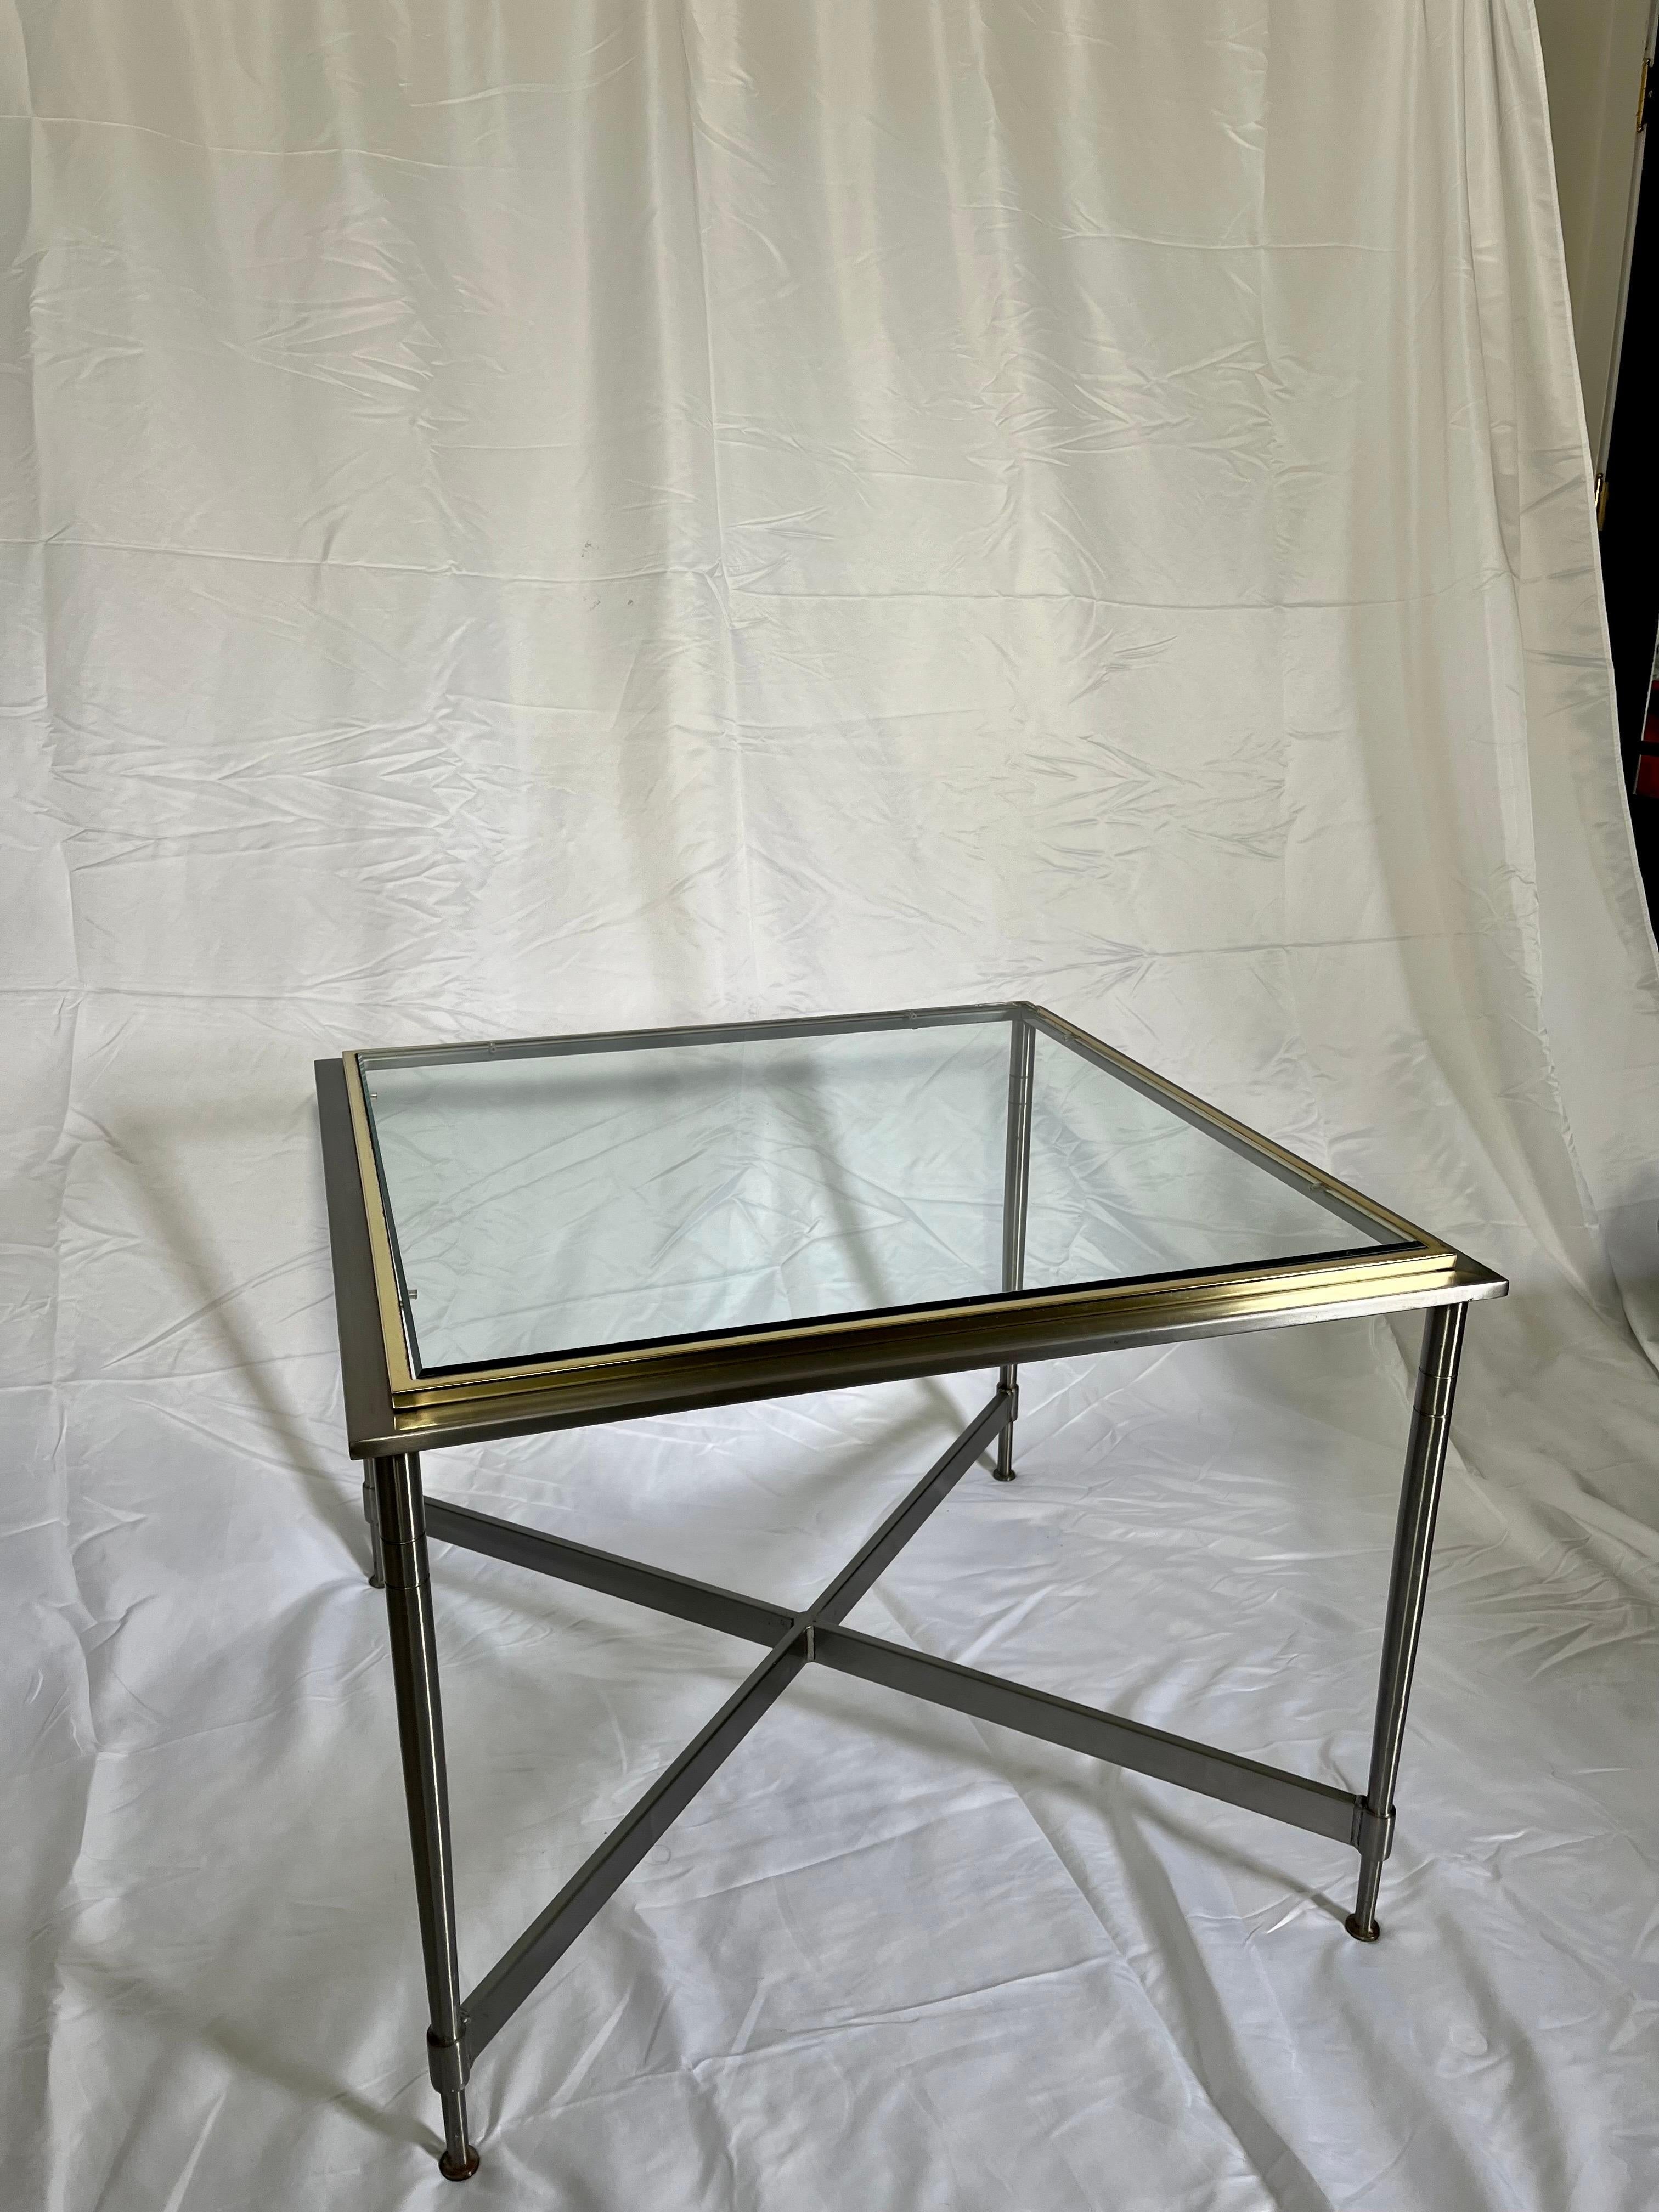 Beautiful classic steel and brass table with glass top in the manner of Maison Jansen. Brushed steel with raised brass frame around glass. Timeless elegance.
Curbside to NYC/Philly $400